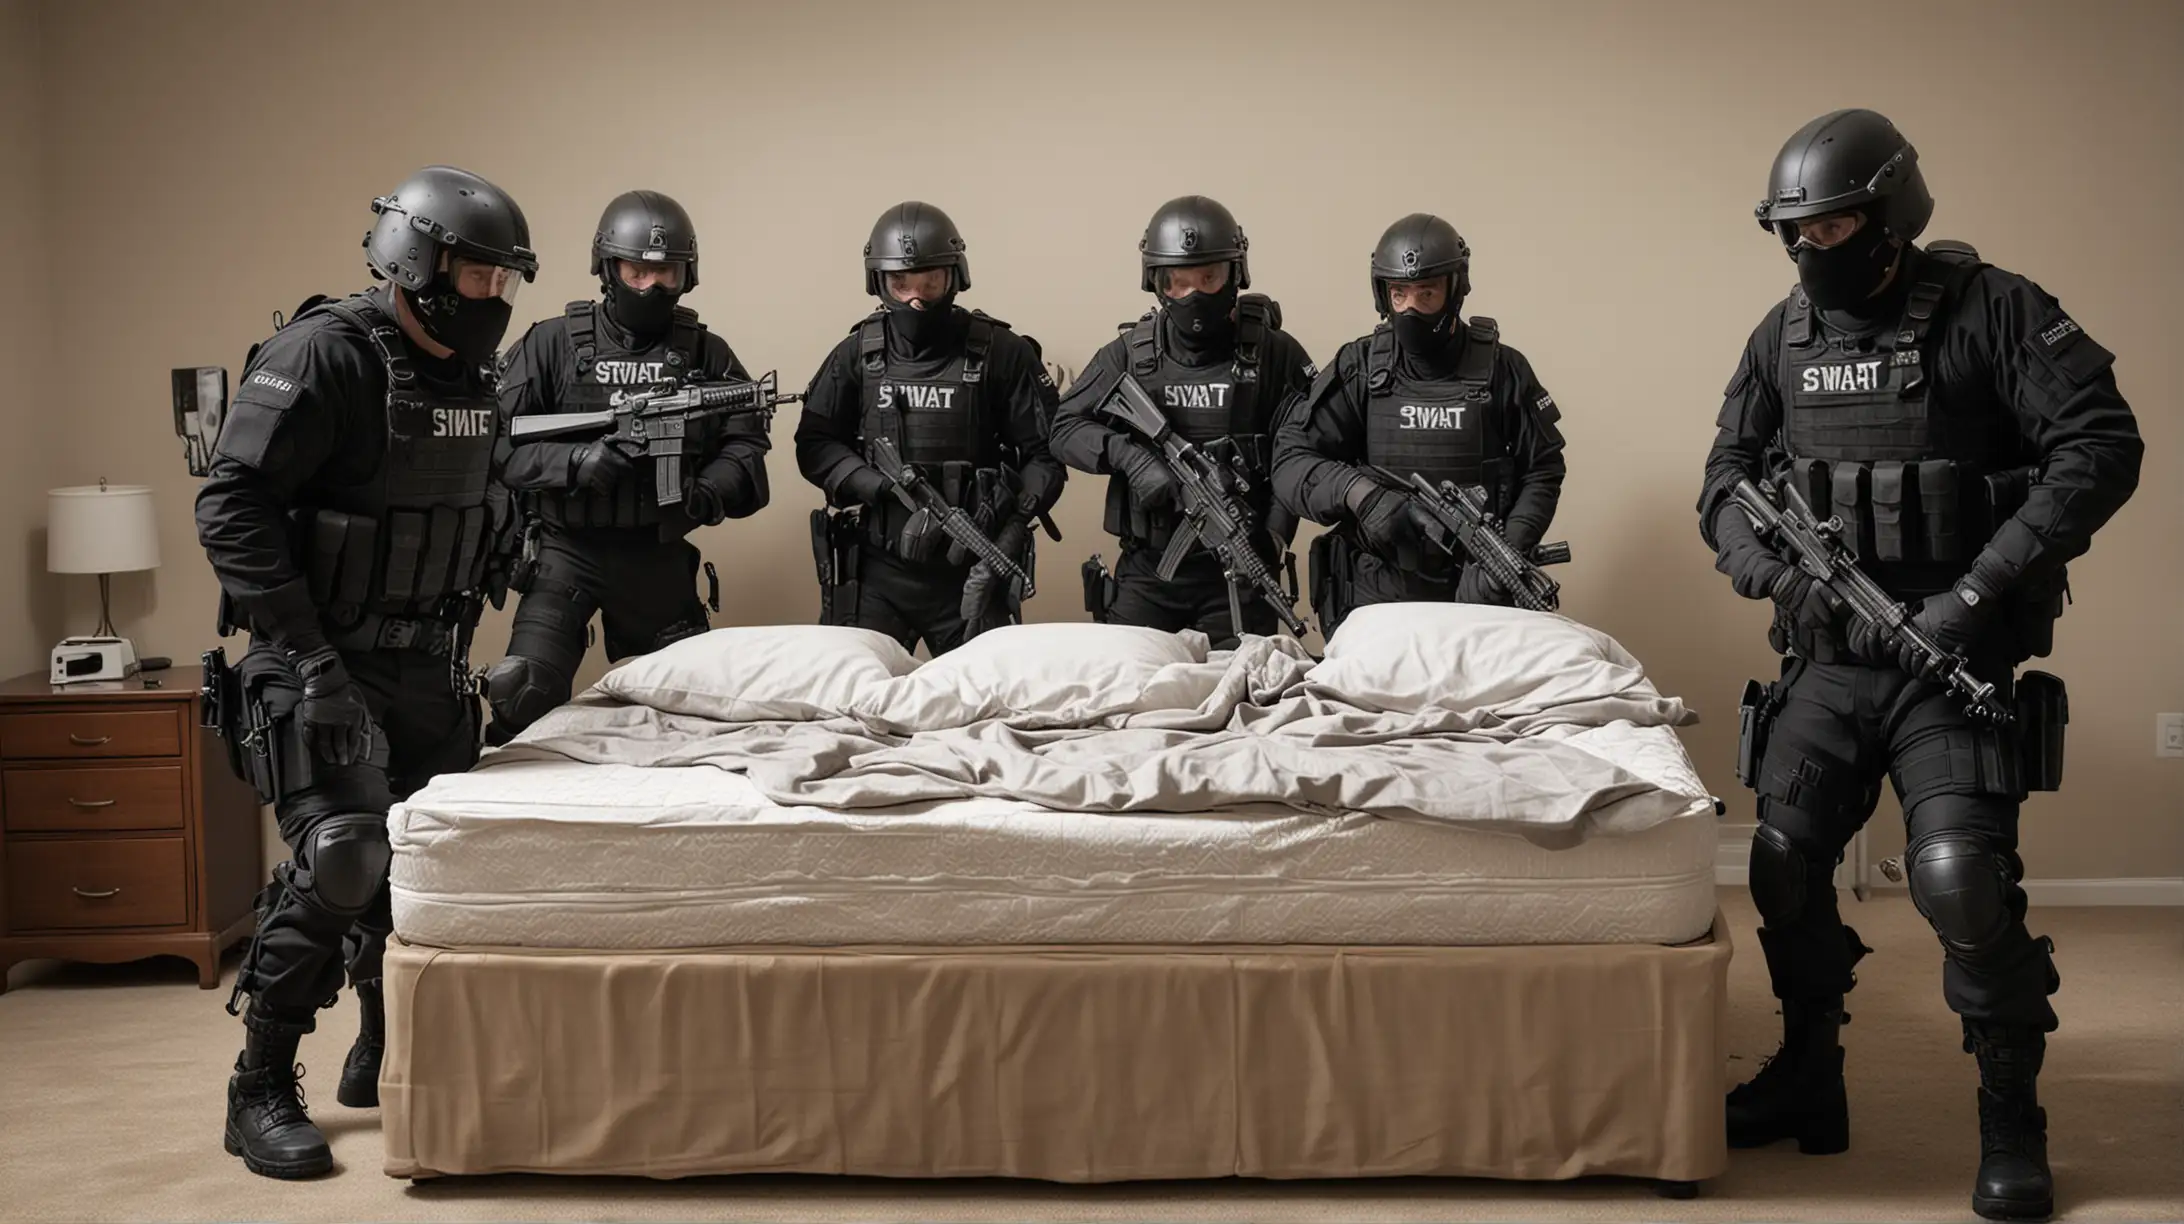 swat storms a bed